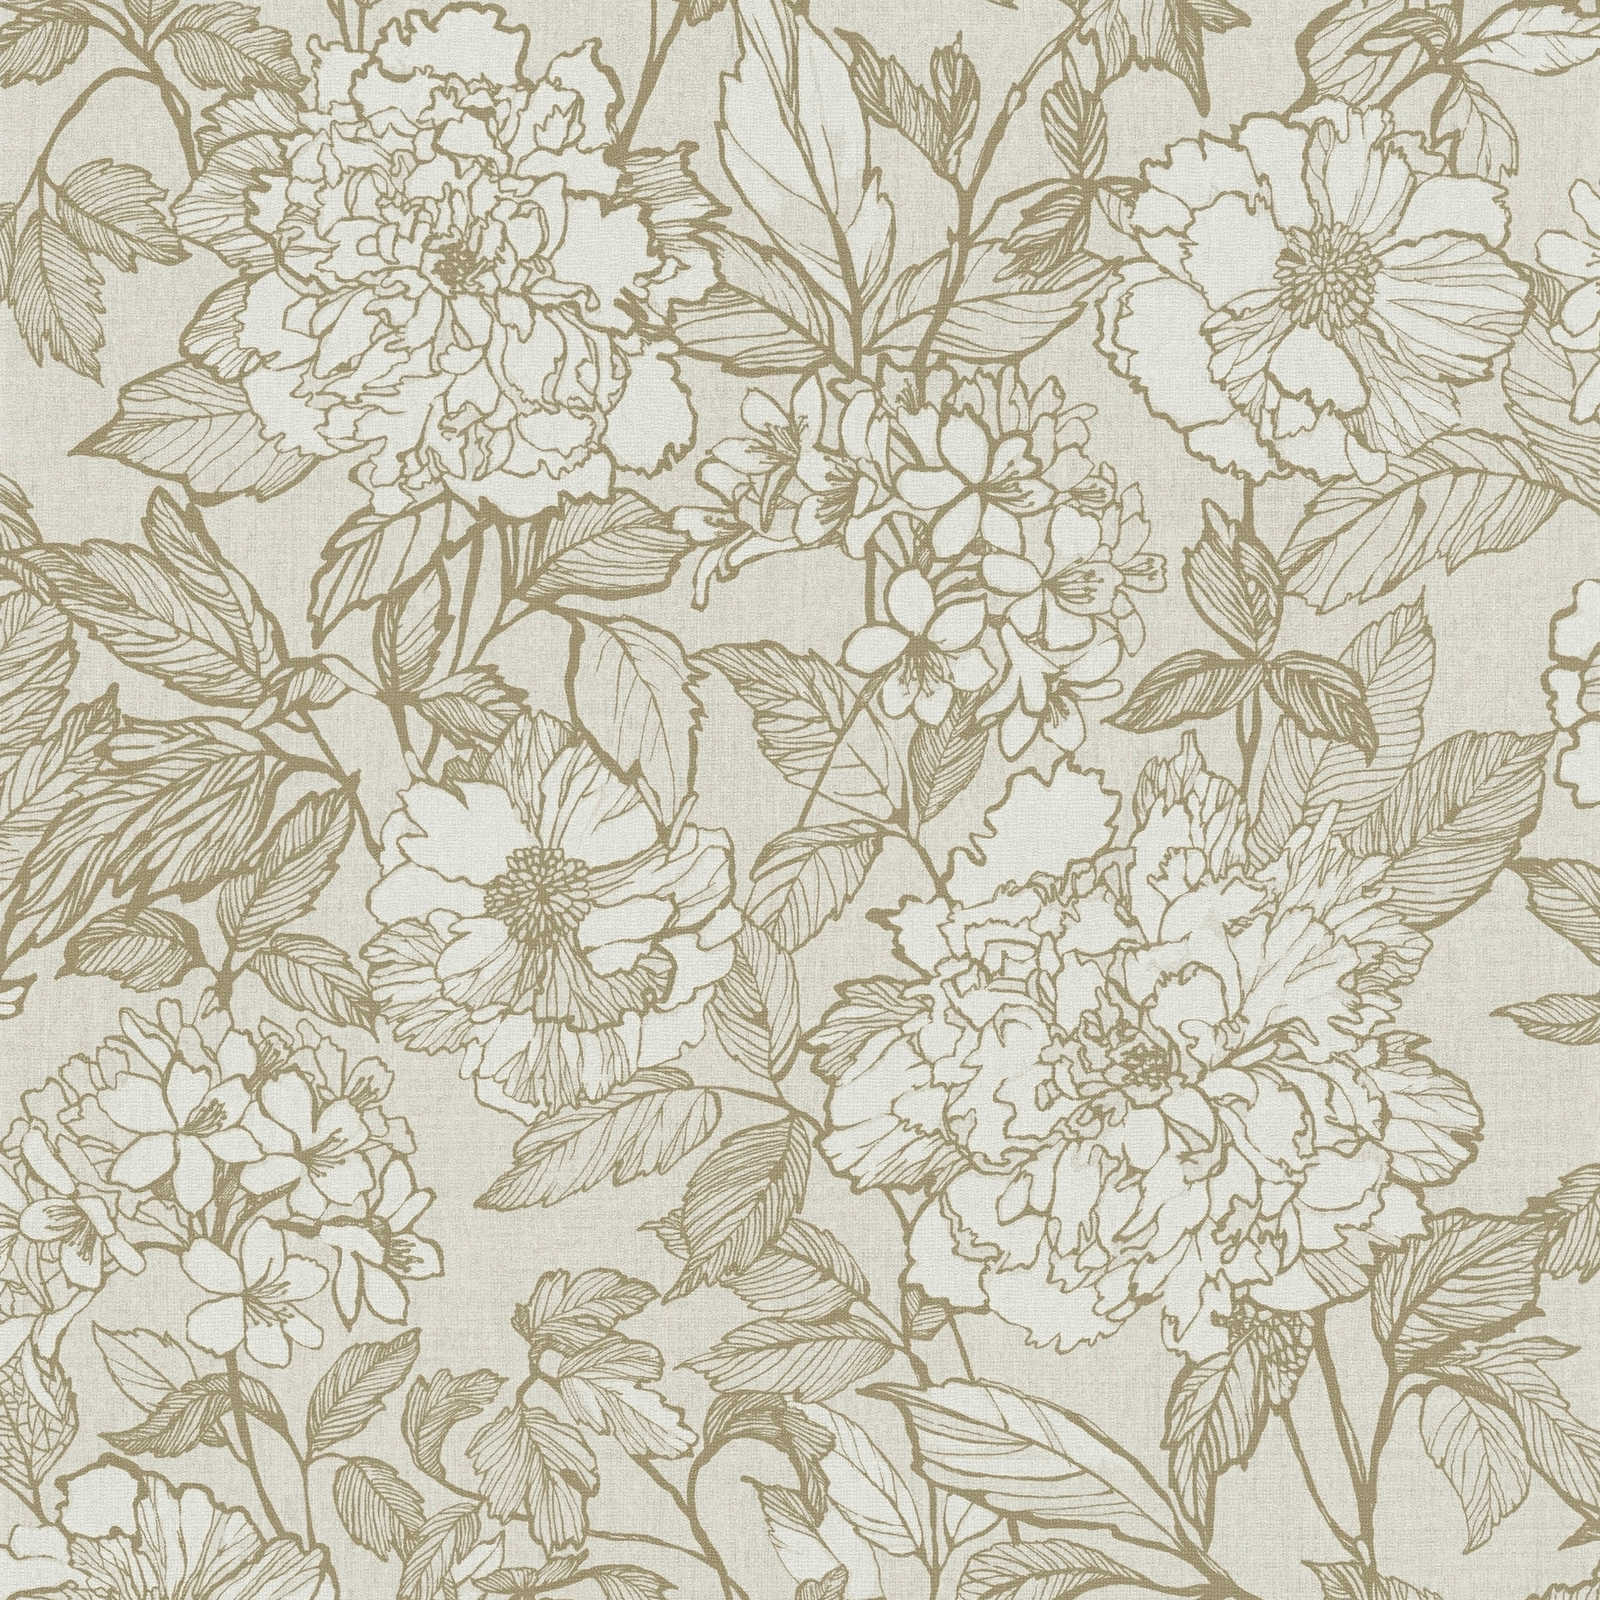 Non-woven wallpaper retro floral pattern and textile look - beige
